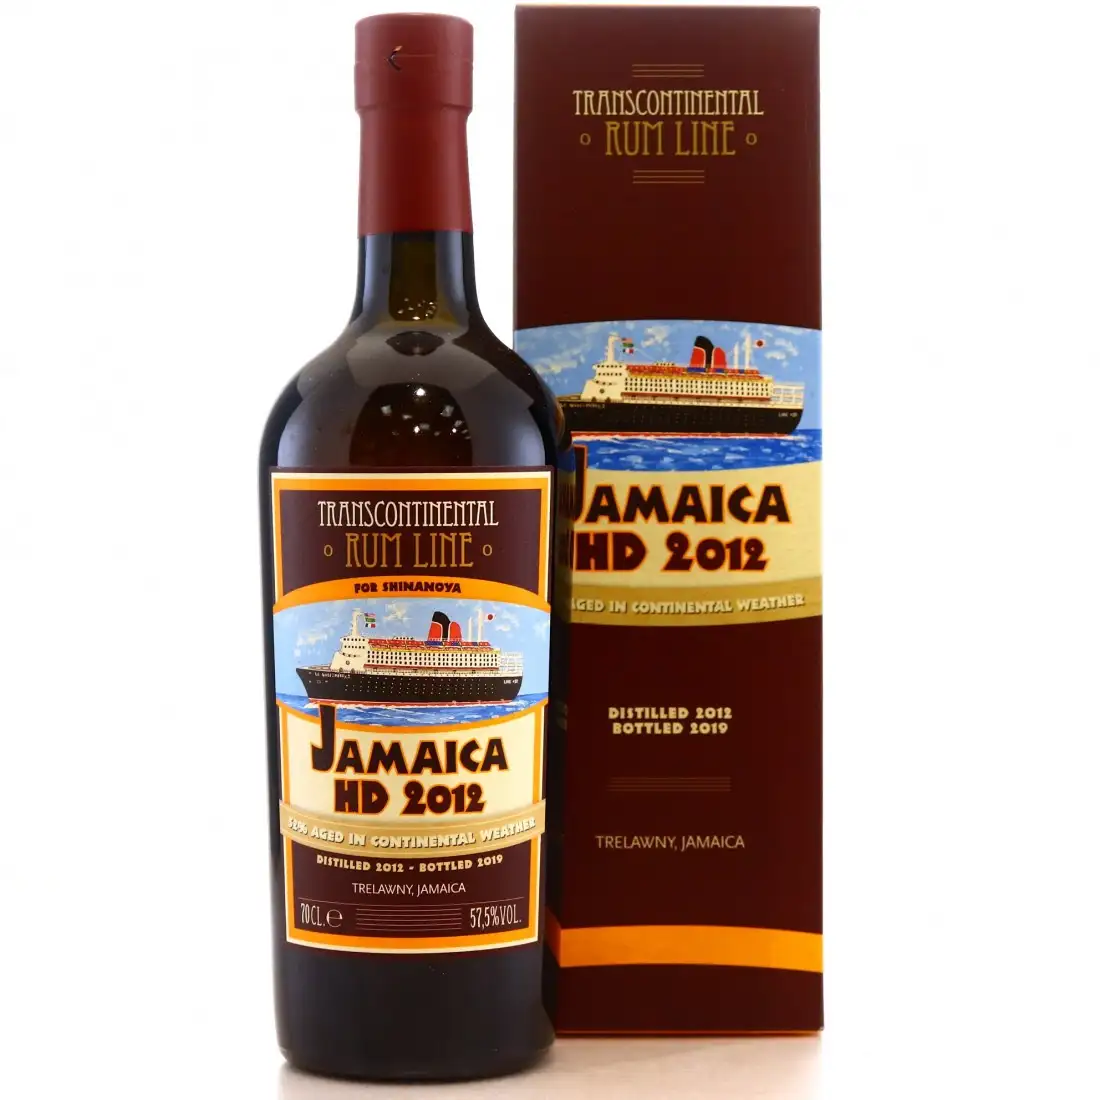 Image of the front of the bottle of the rum Jamaica HD (Selected by LMDW/Shinanoya)